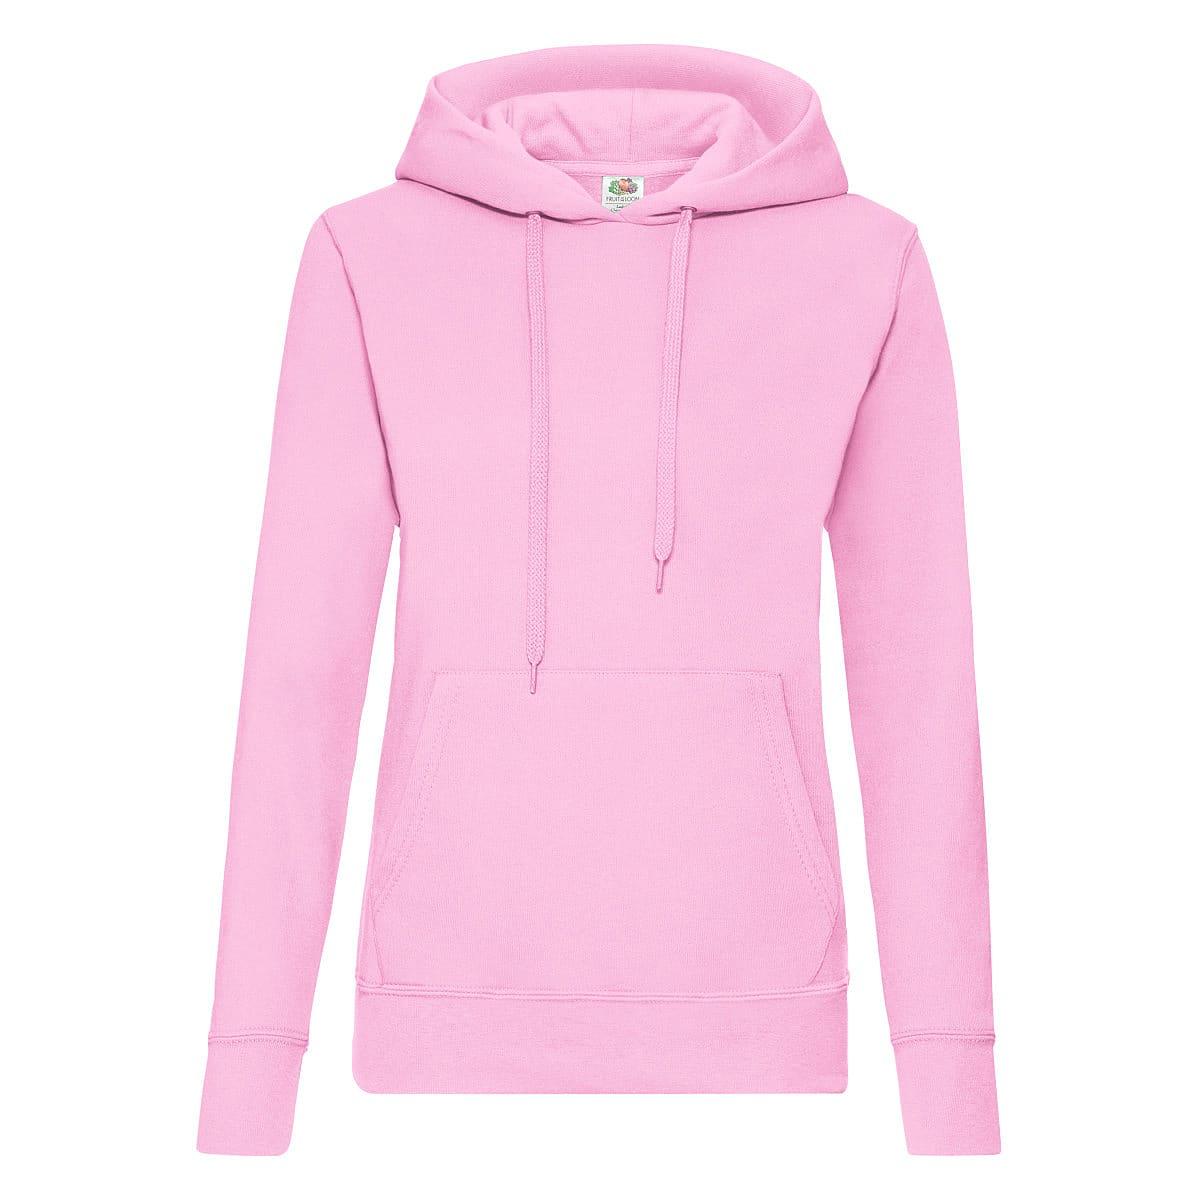 Fruit Of The Loom Lady-Fit Classic Hoodie in Light Pink (Product Code: 62038)